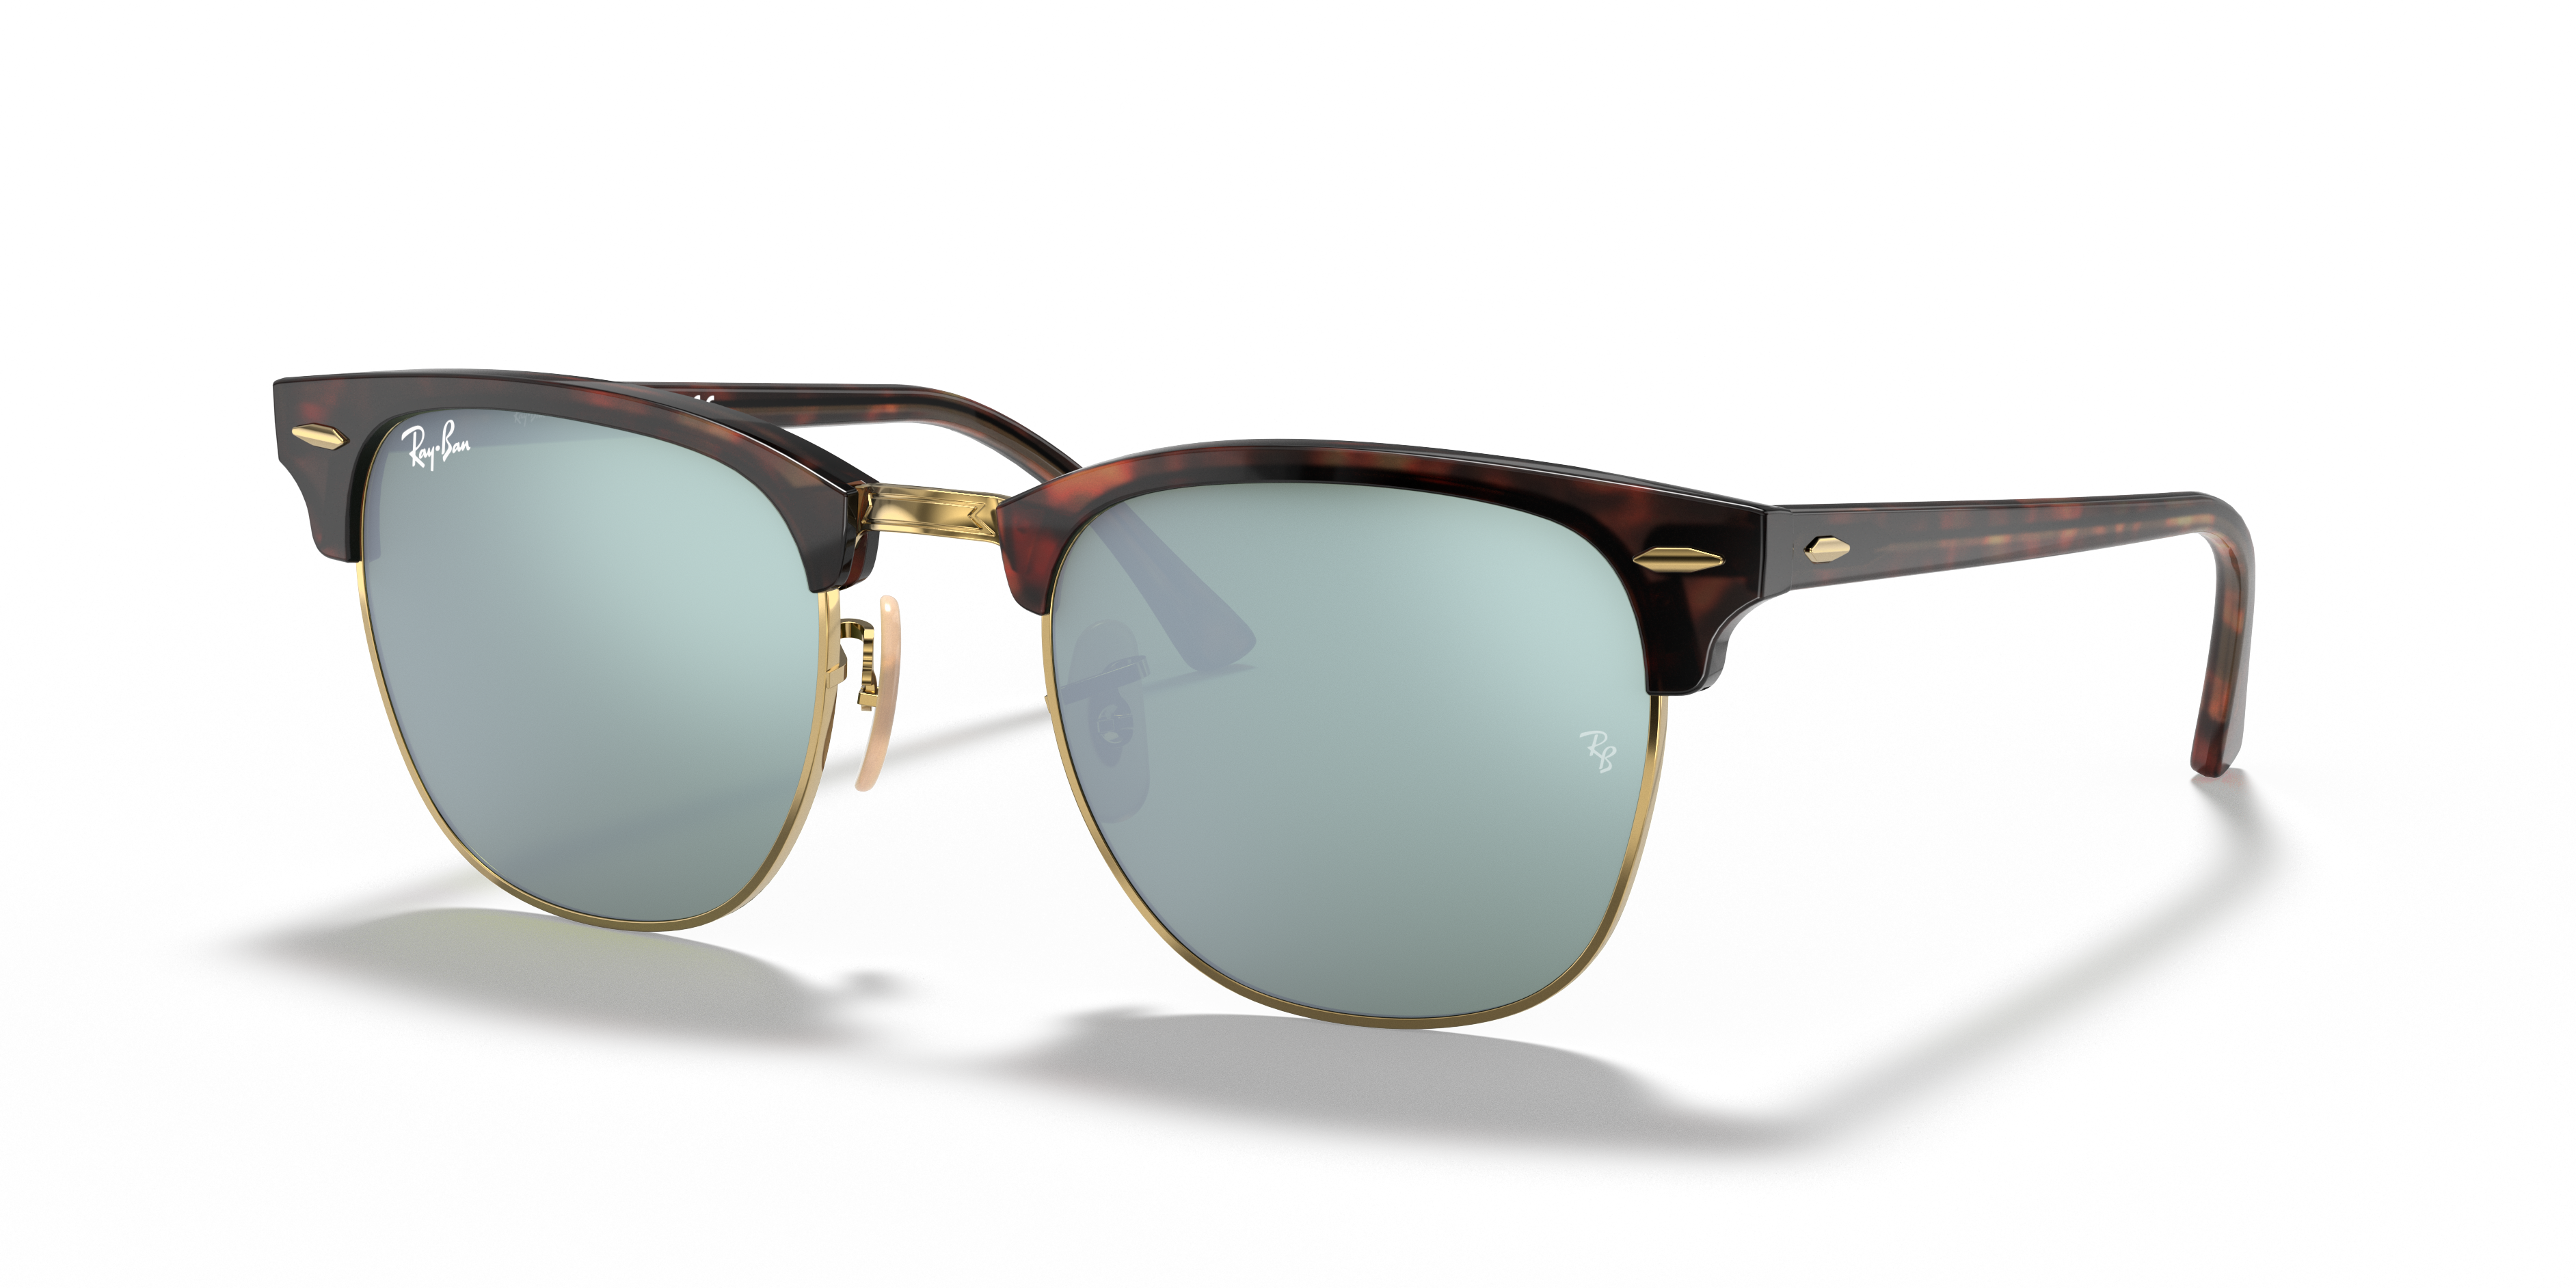 Clubmaster Flash Lenses Sunglasses In Tortoise And Silver Ray Ban